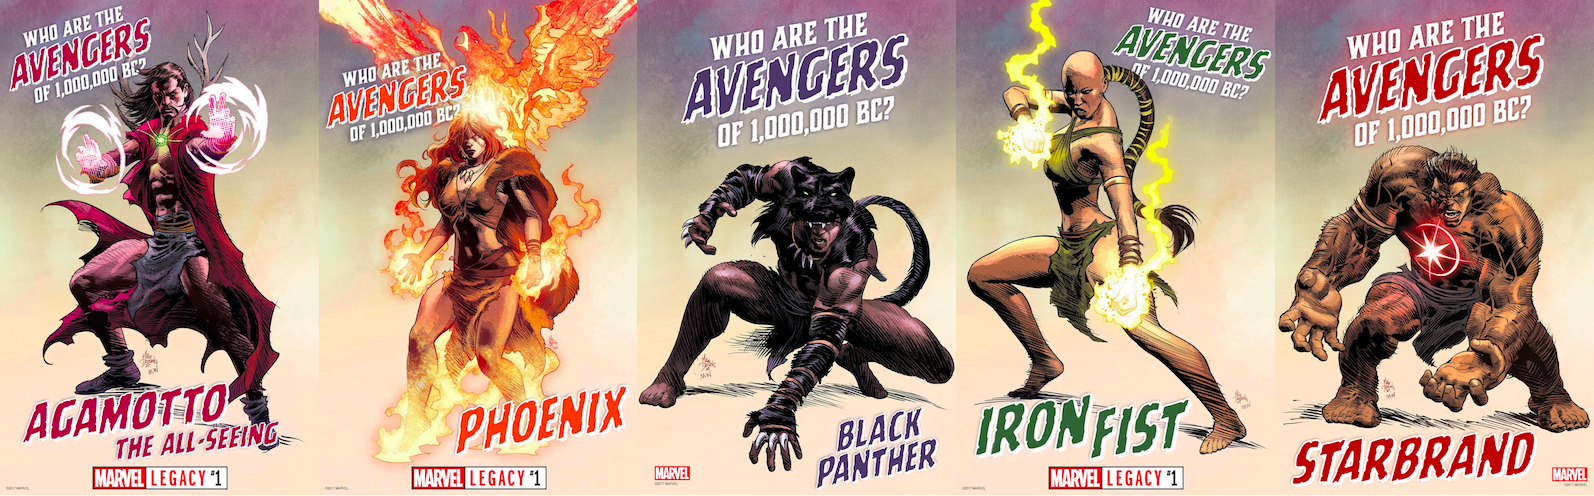 Marvel’s Legacy Event Is Getting Weird With The Prehistoric Avengers Of 1,000,000 BC